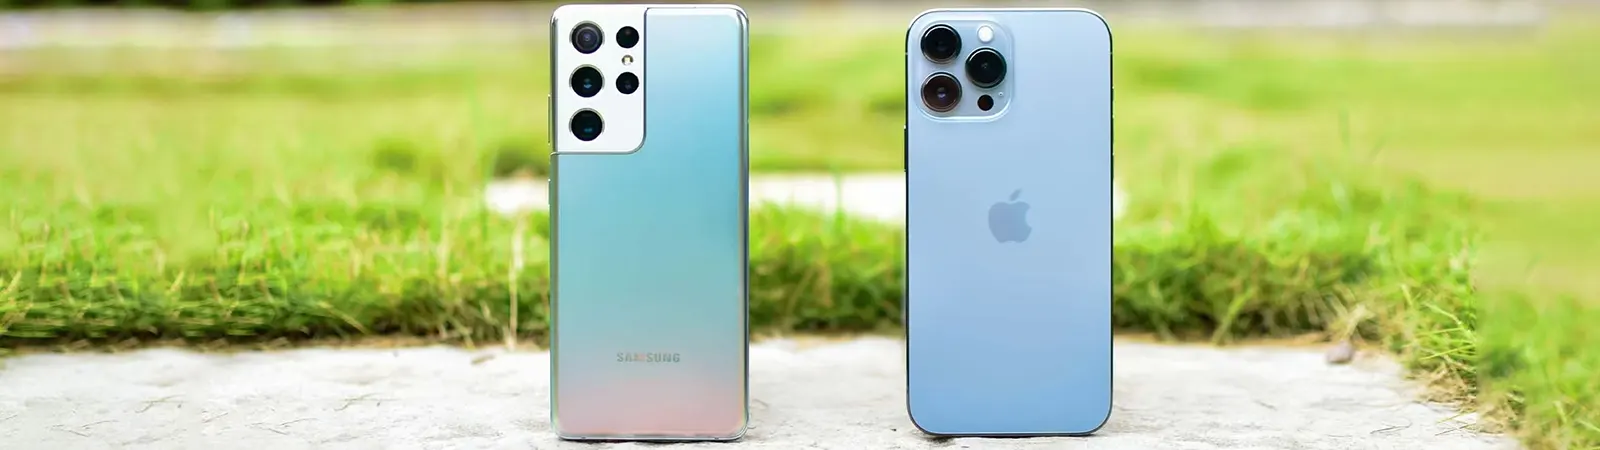 Apple IPhone 13, 13 Pro, And The Samsung Galaxy S21 - (2021)